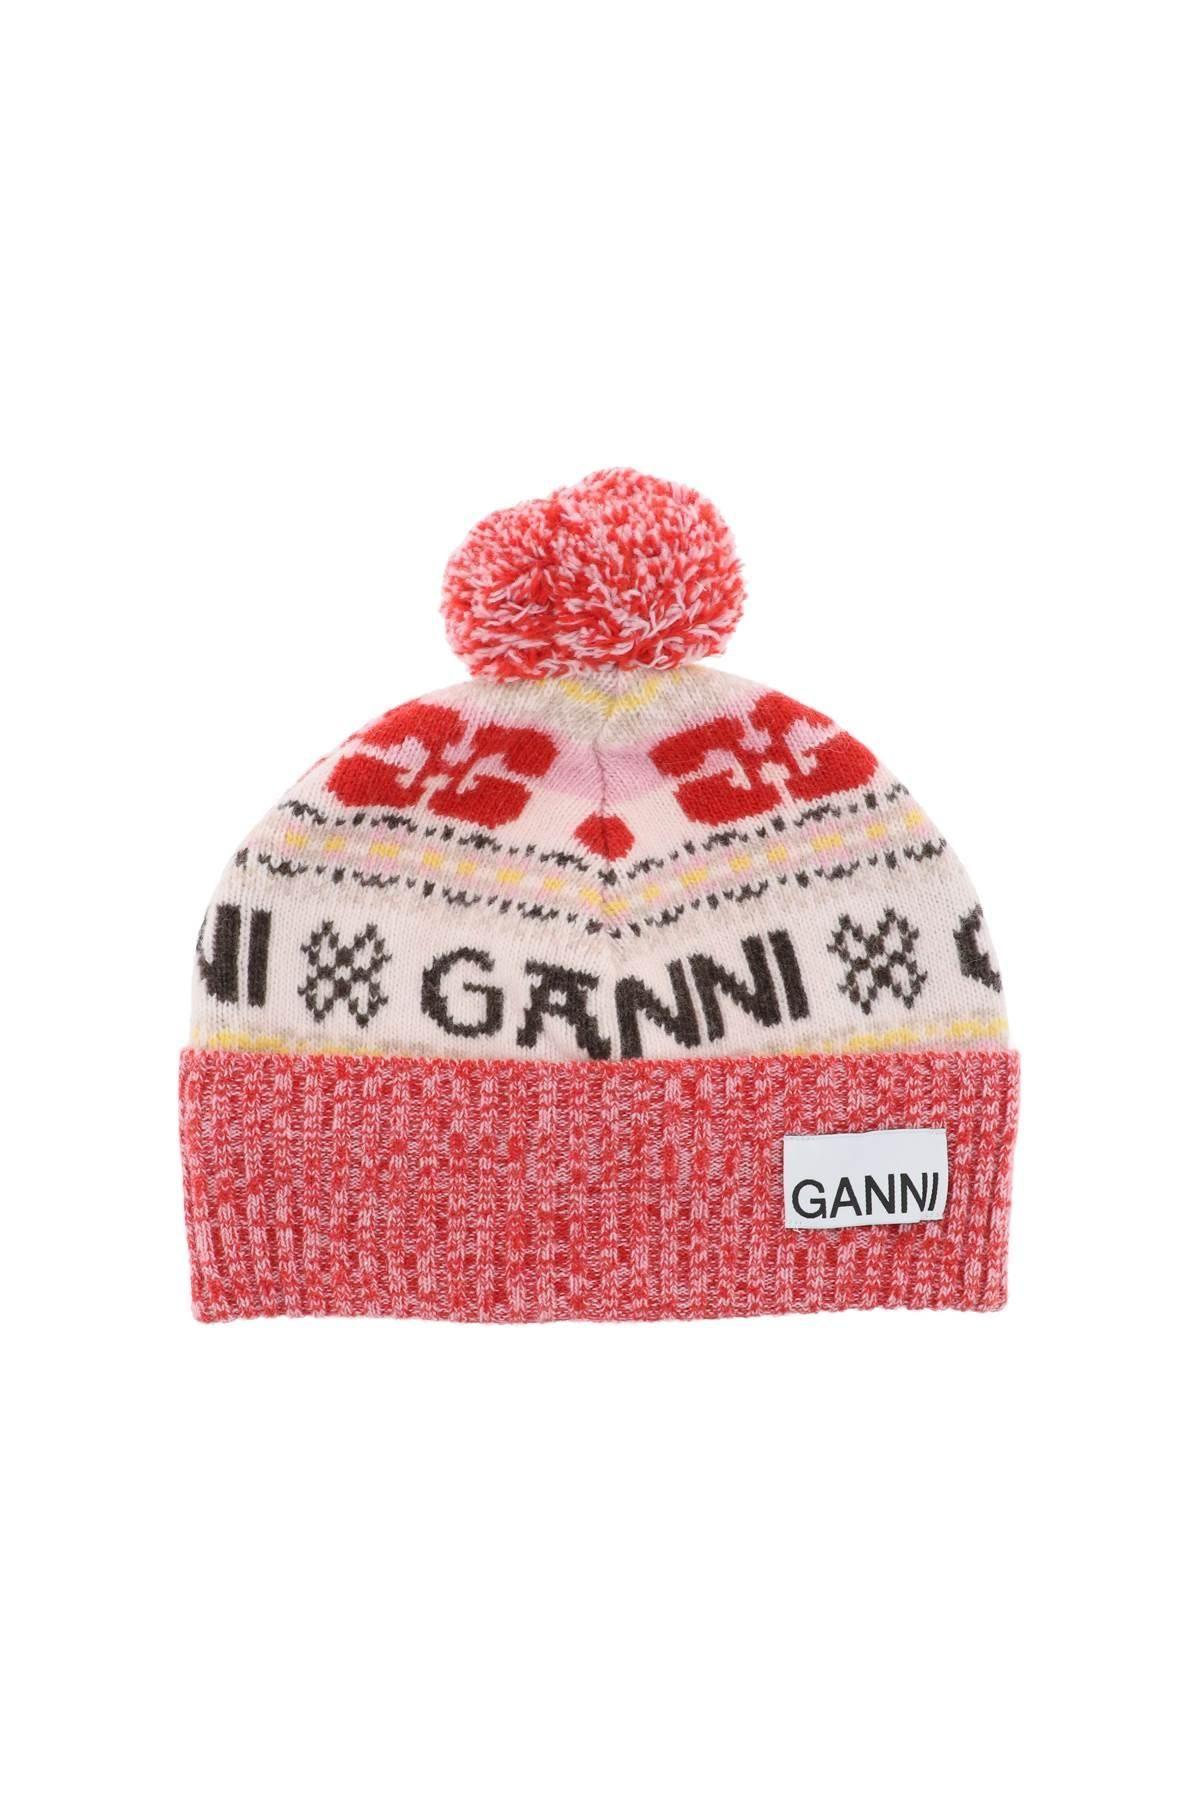 Ganni Recycled Wool Beanie Hat in Red | Lyst